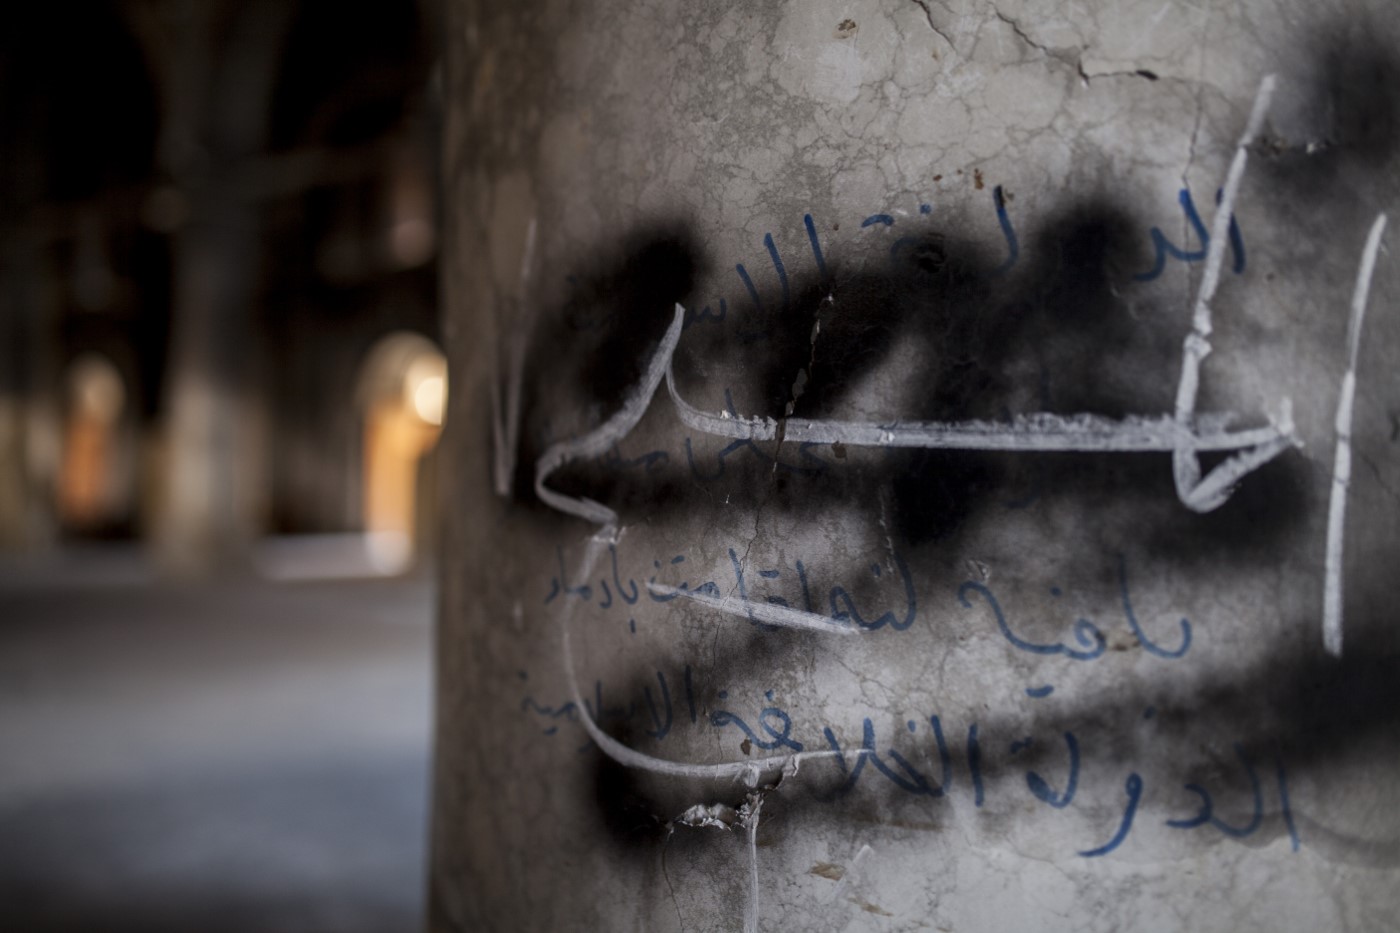 Arabic script drawn by ISIS members on one of the pillars inside the Kanesa Altaherea Alkbra church: "(...) The Islamic State remains because it’s got blood" The church was occupied and then burned by the Daesh in 2016. Qaraqosh - Hamdania - Mosul , Iraq. April 17, 2017